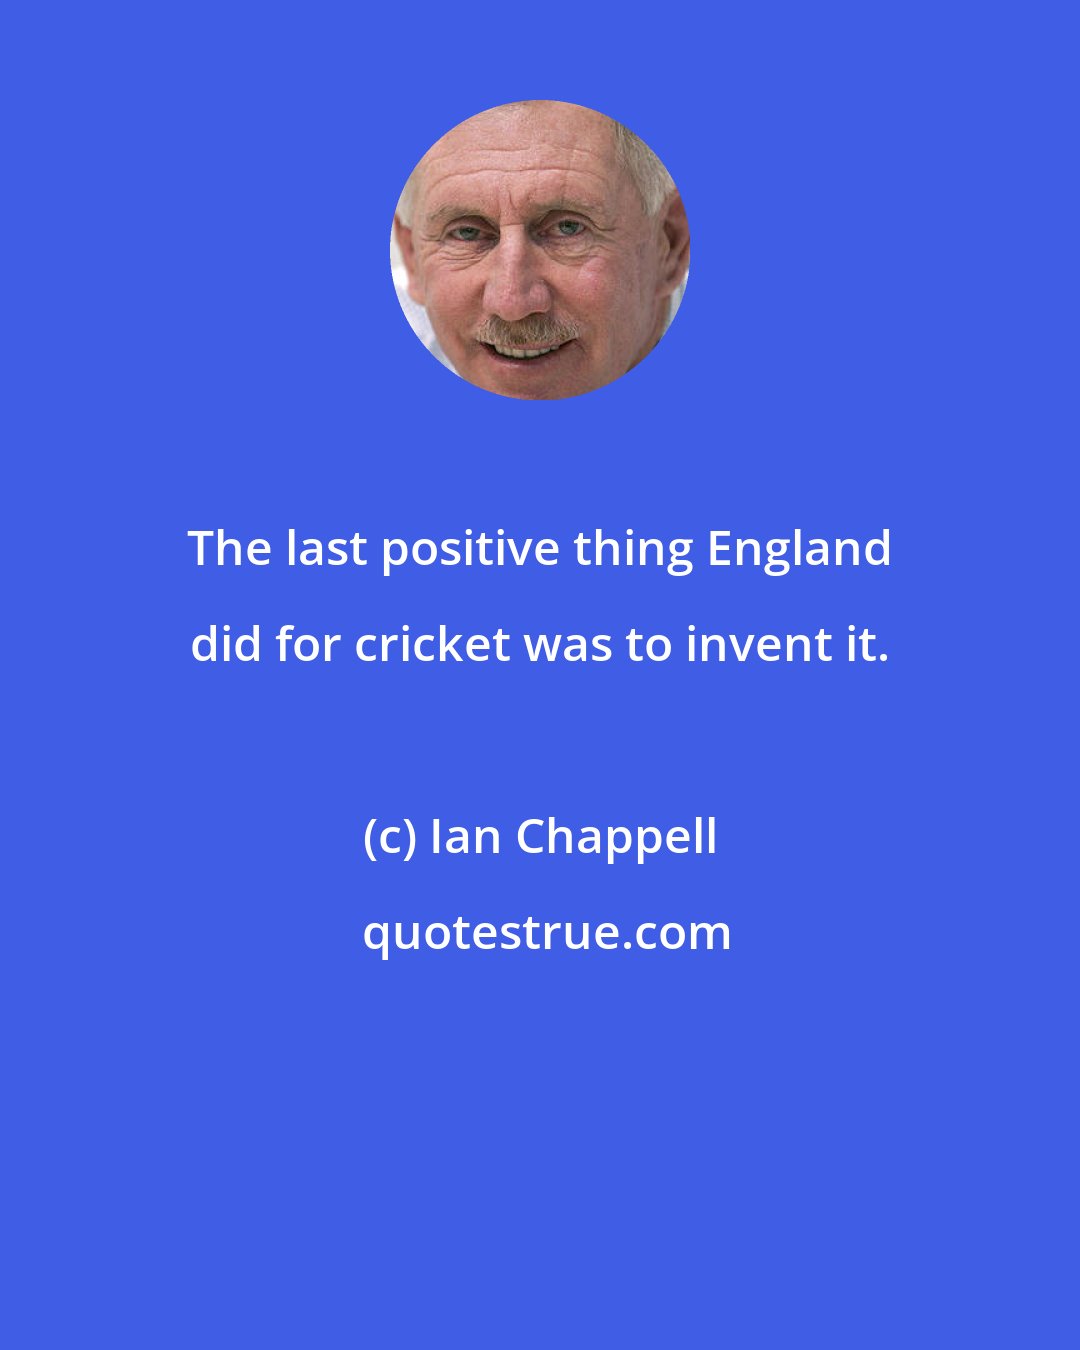 Ian Chappell: The last positive thing England did for cricket was to invent it.